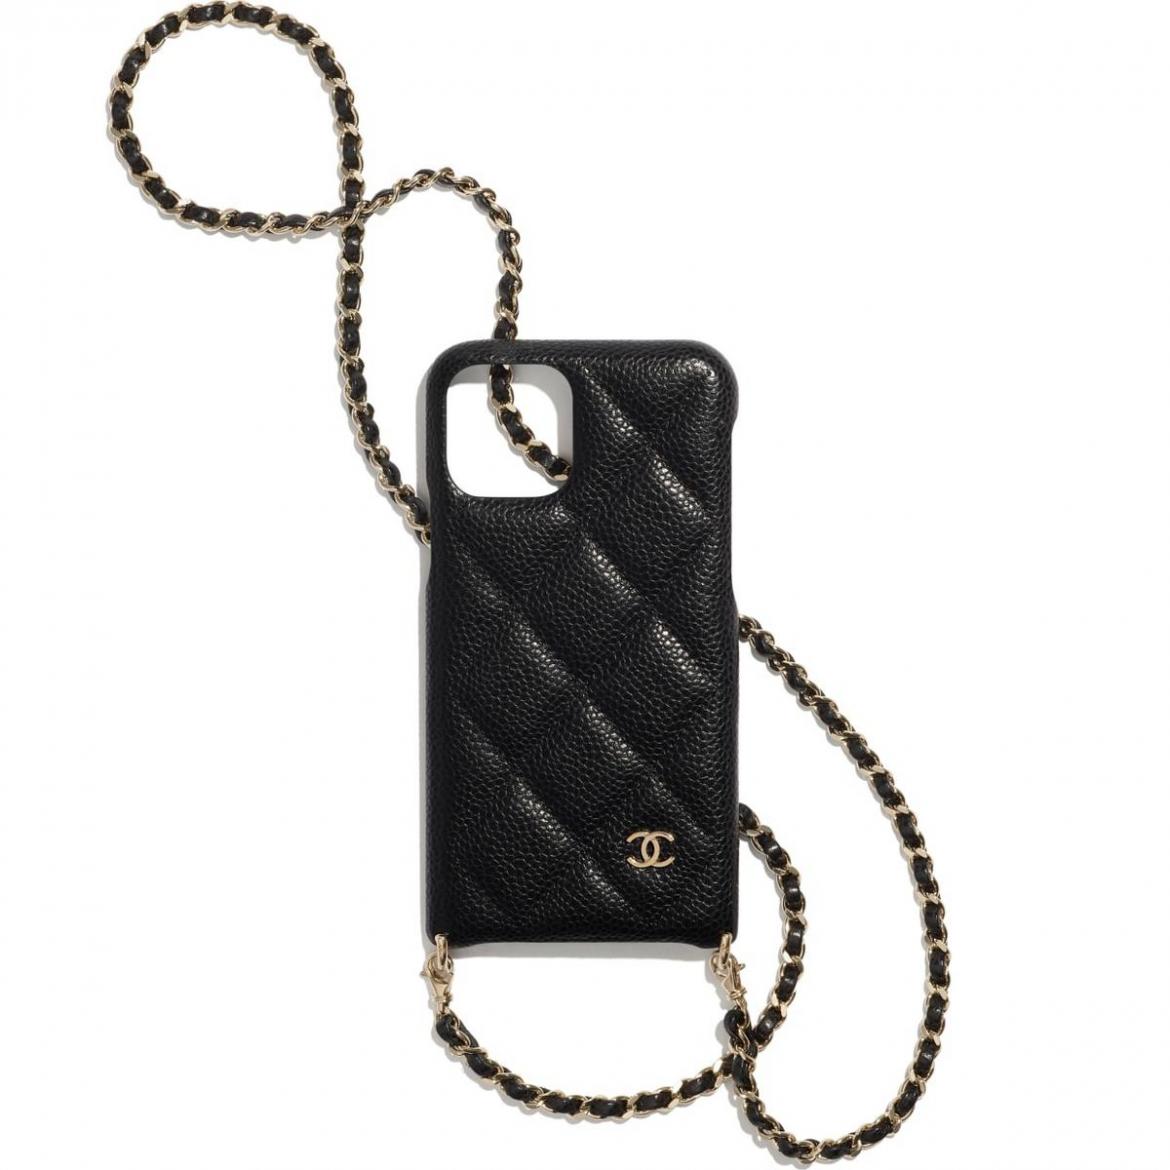 Chanel makes iPhone cases that start at $1,000 and you will love them